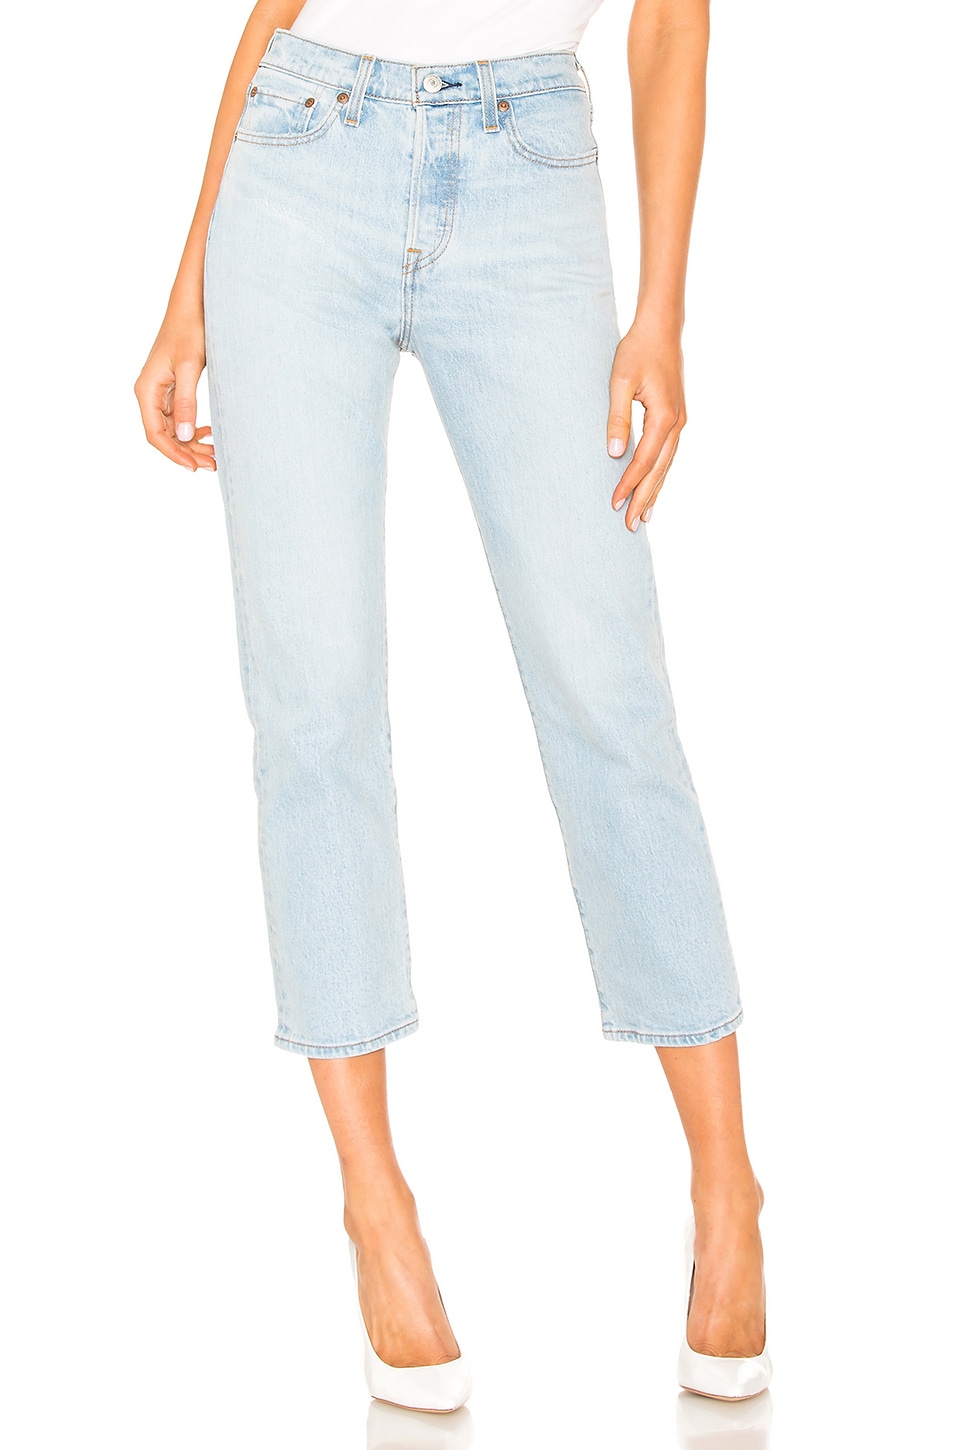 LEVI'S Wedgie Straight in Dibs | REVOLVE